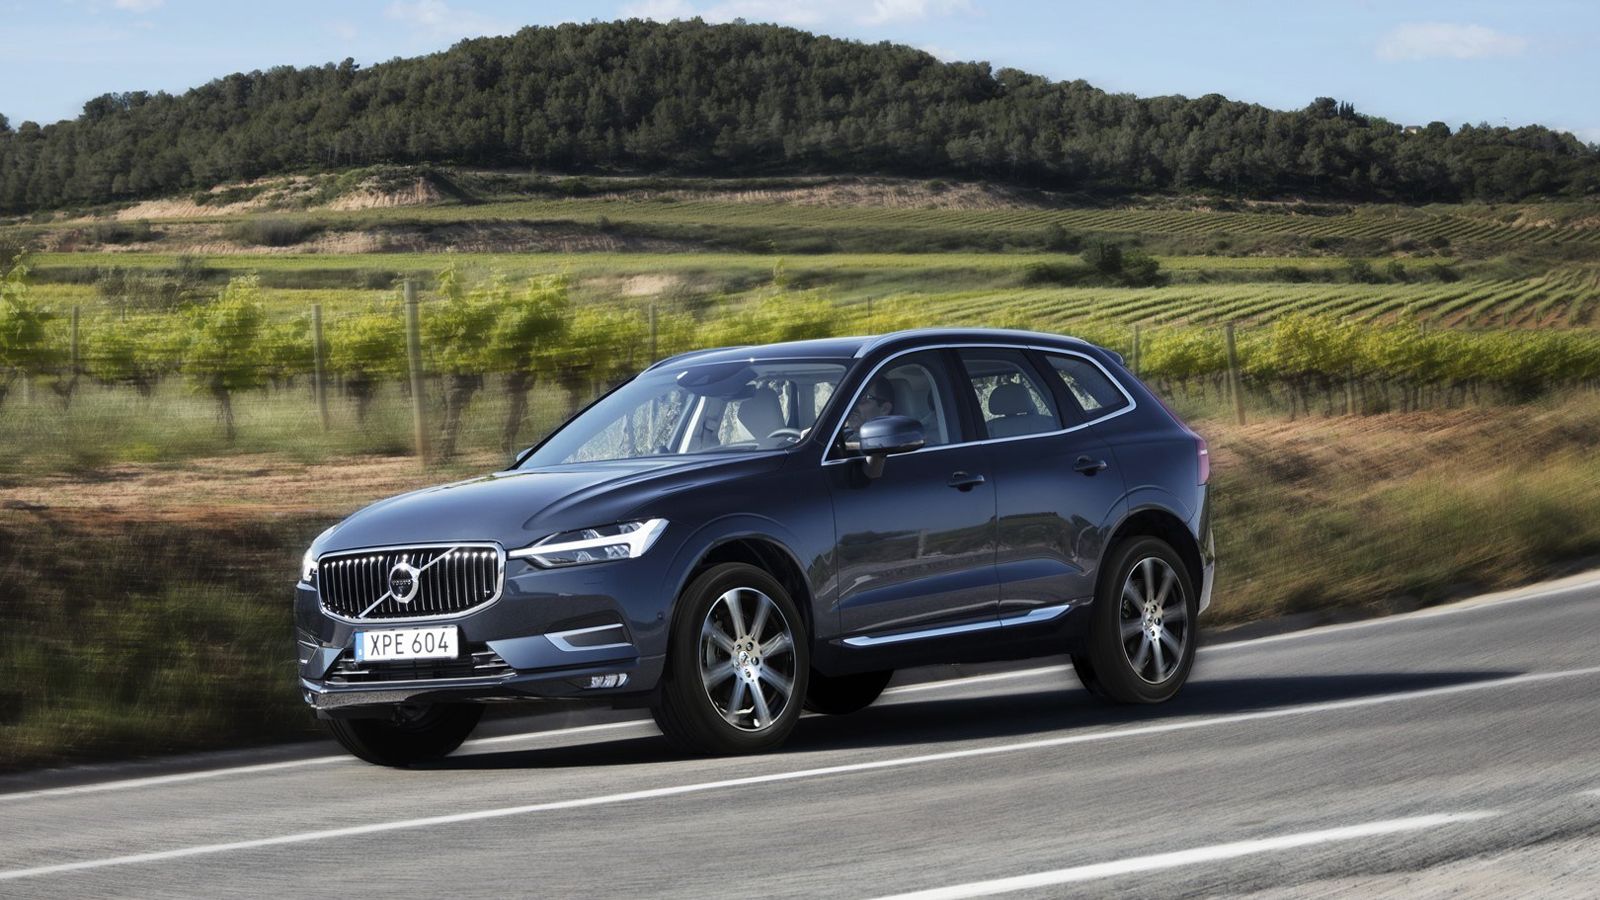 2020 Volvo XC60 Inscription road test: Everything you need to know